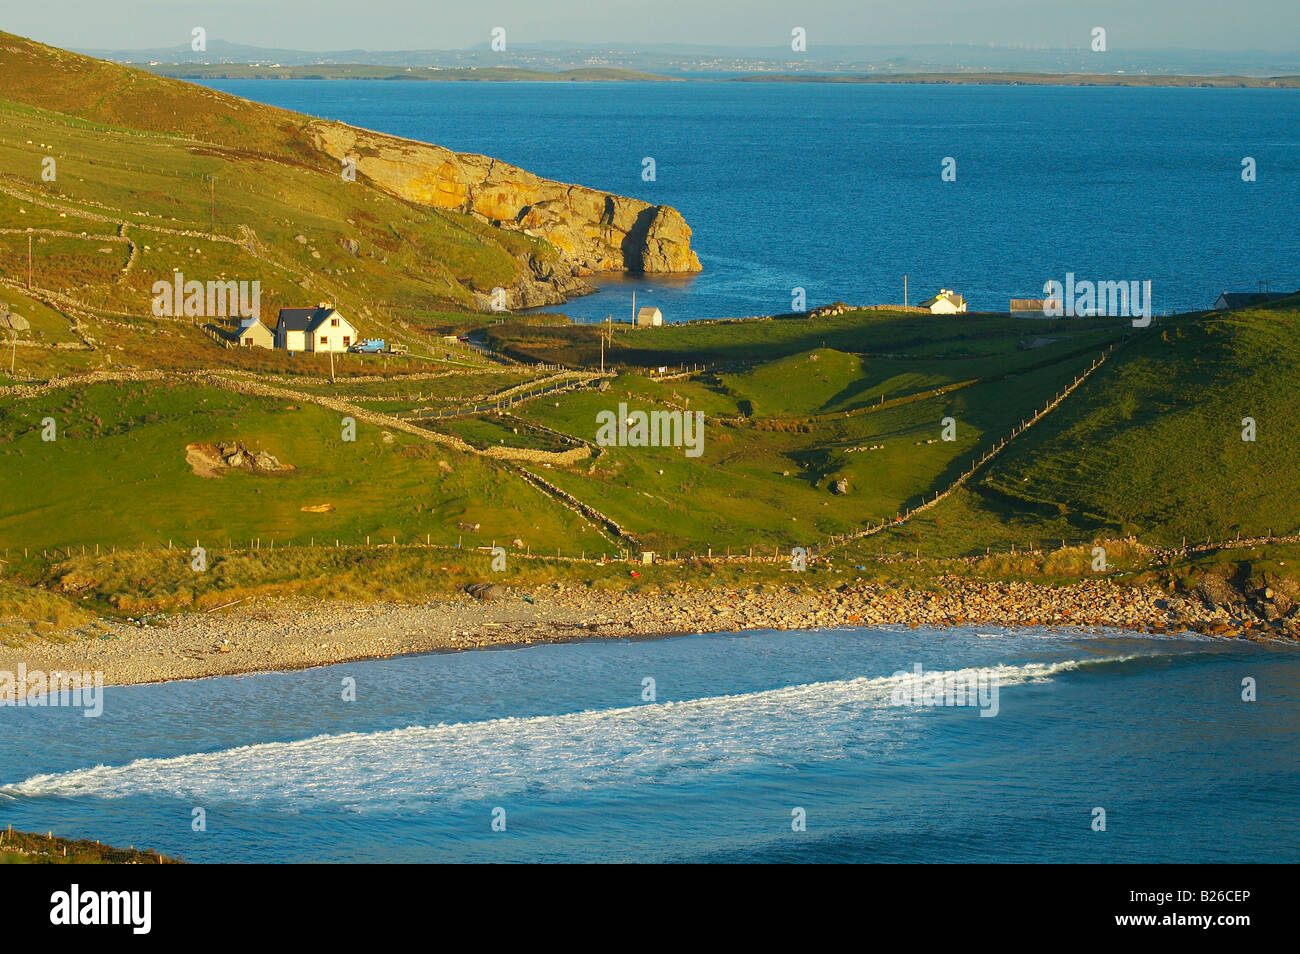 Outdoor-Foto, Muckros Head, Donegal Bay, County Donegal, Irland, Europa Stockfoto